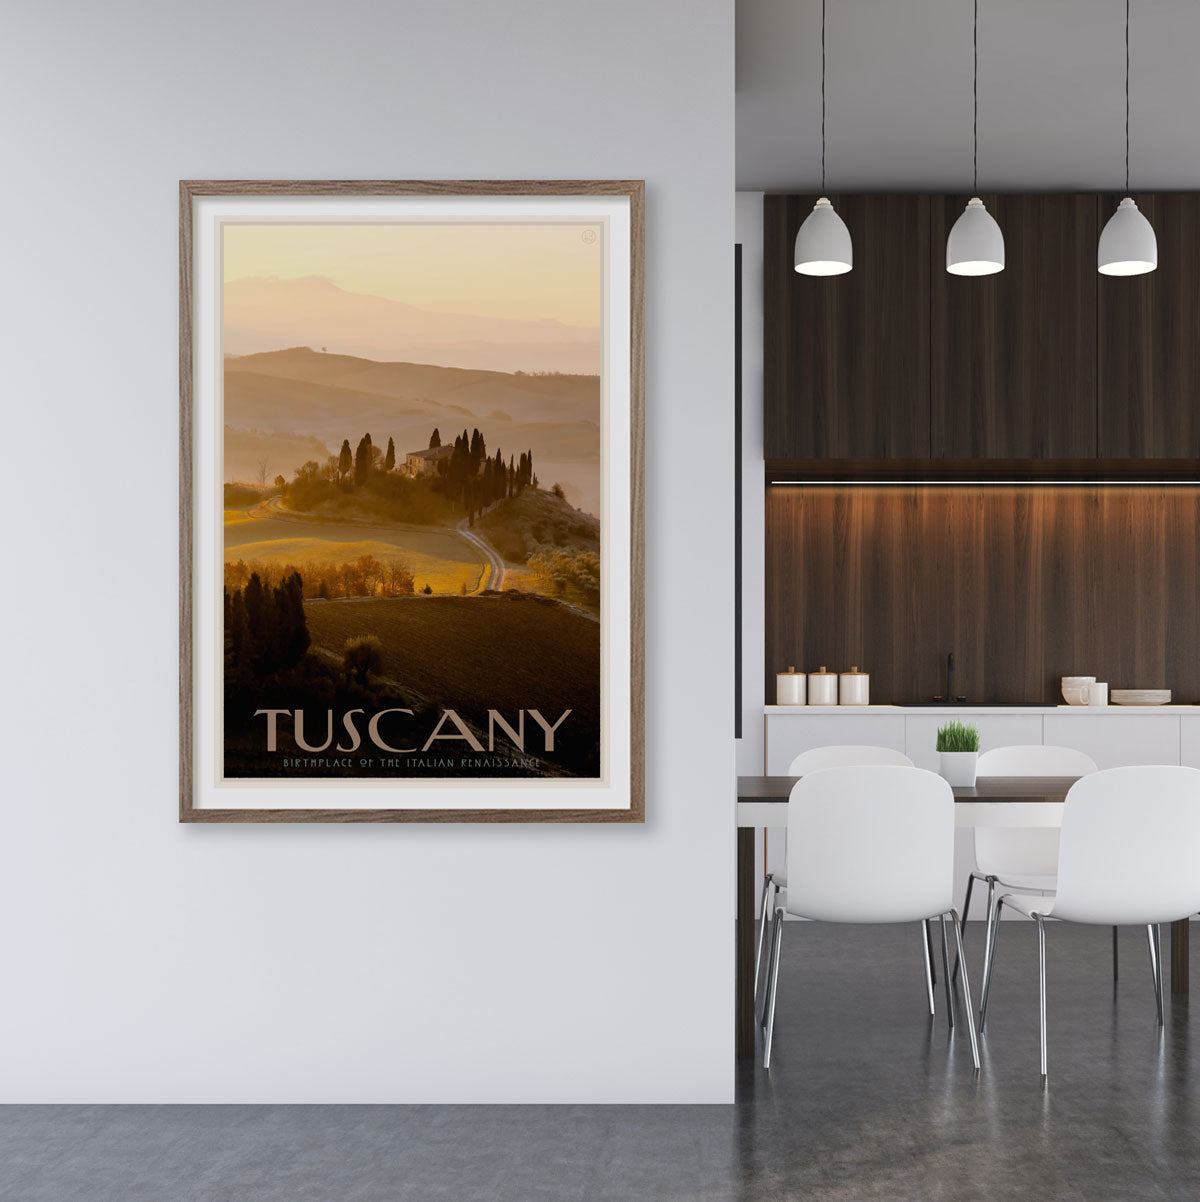 Tuscany framed vintage travel poster designed by Placesweluv